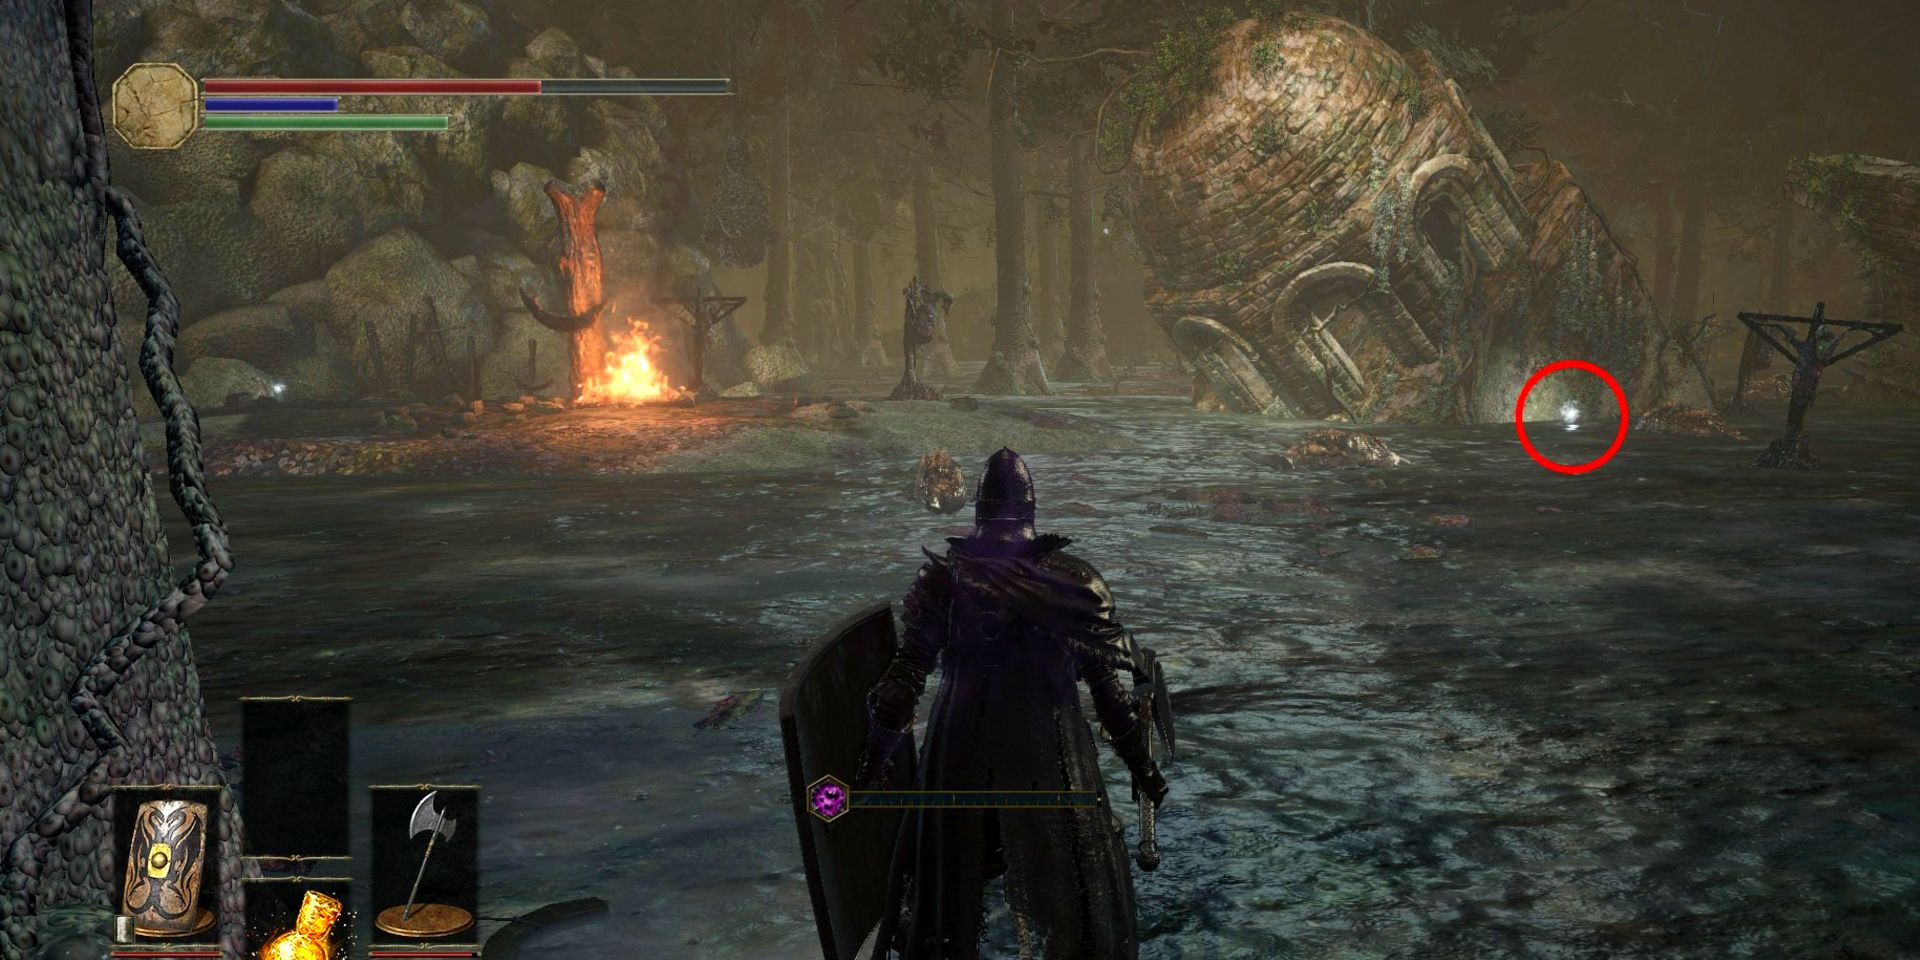 poison swamp area with an outline of where an estus shard is.